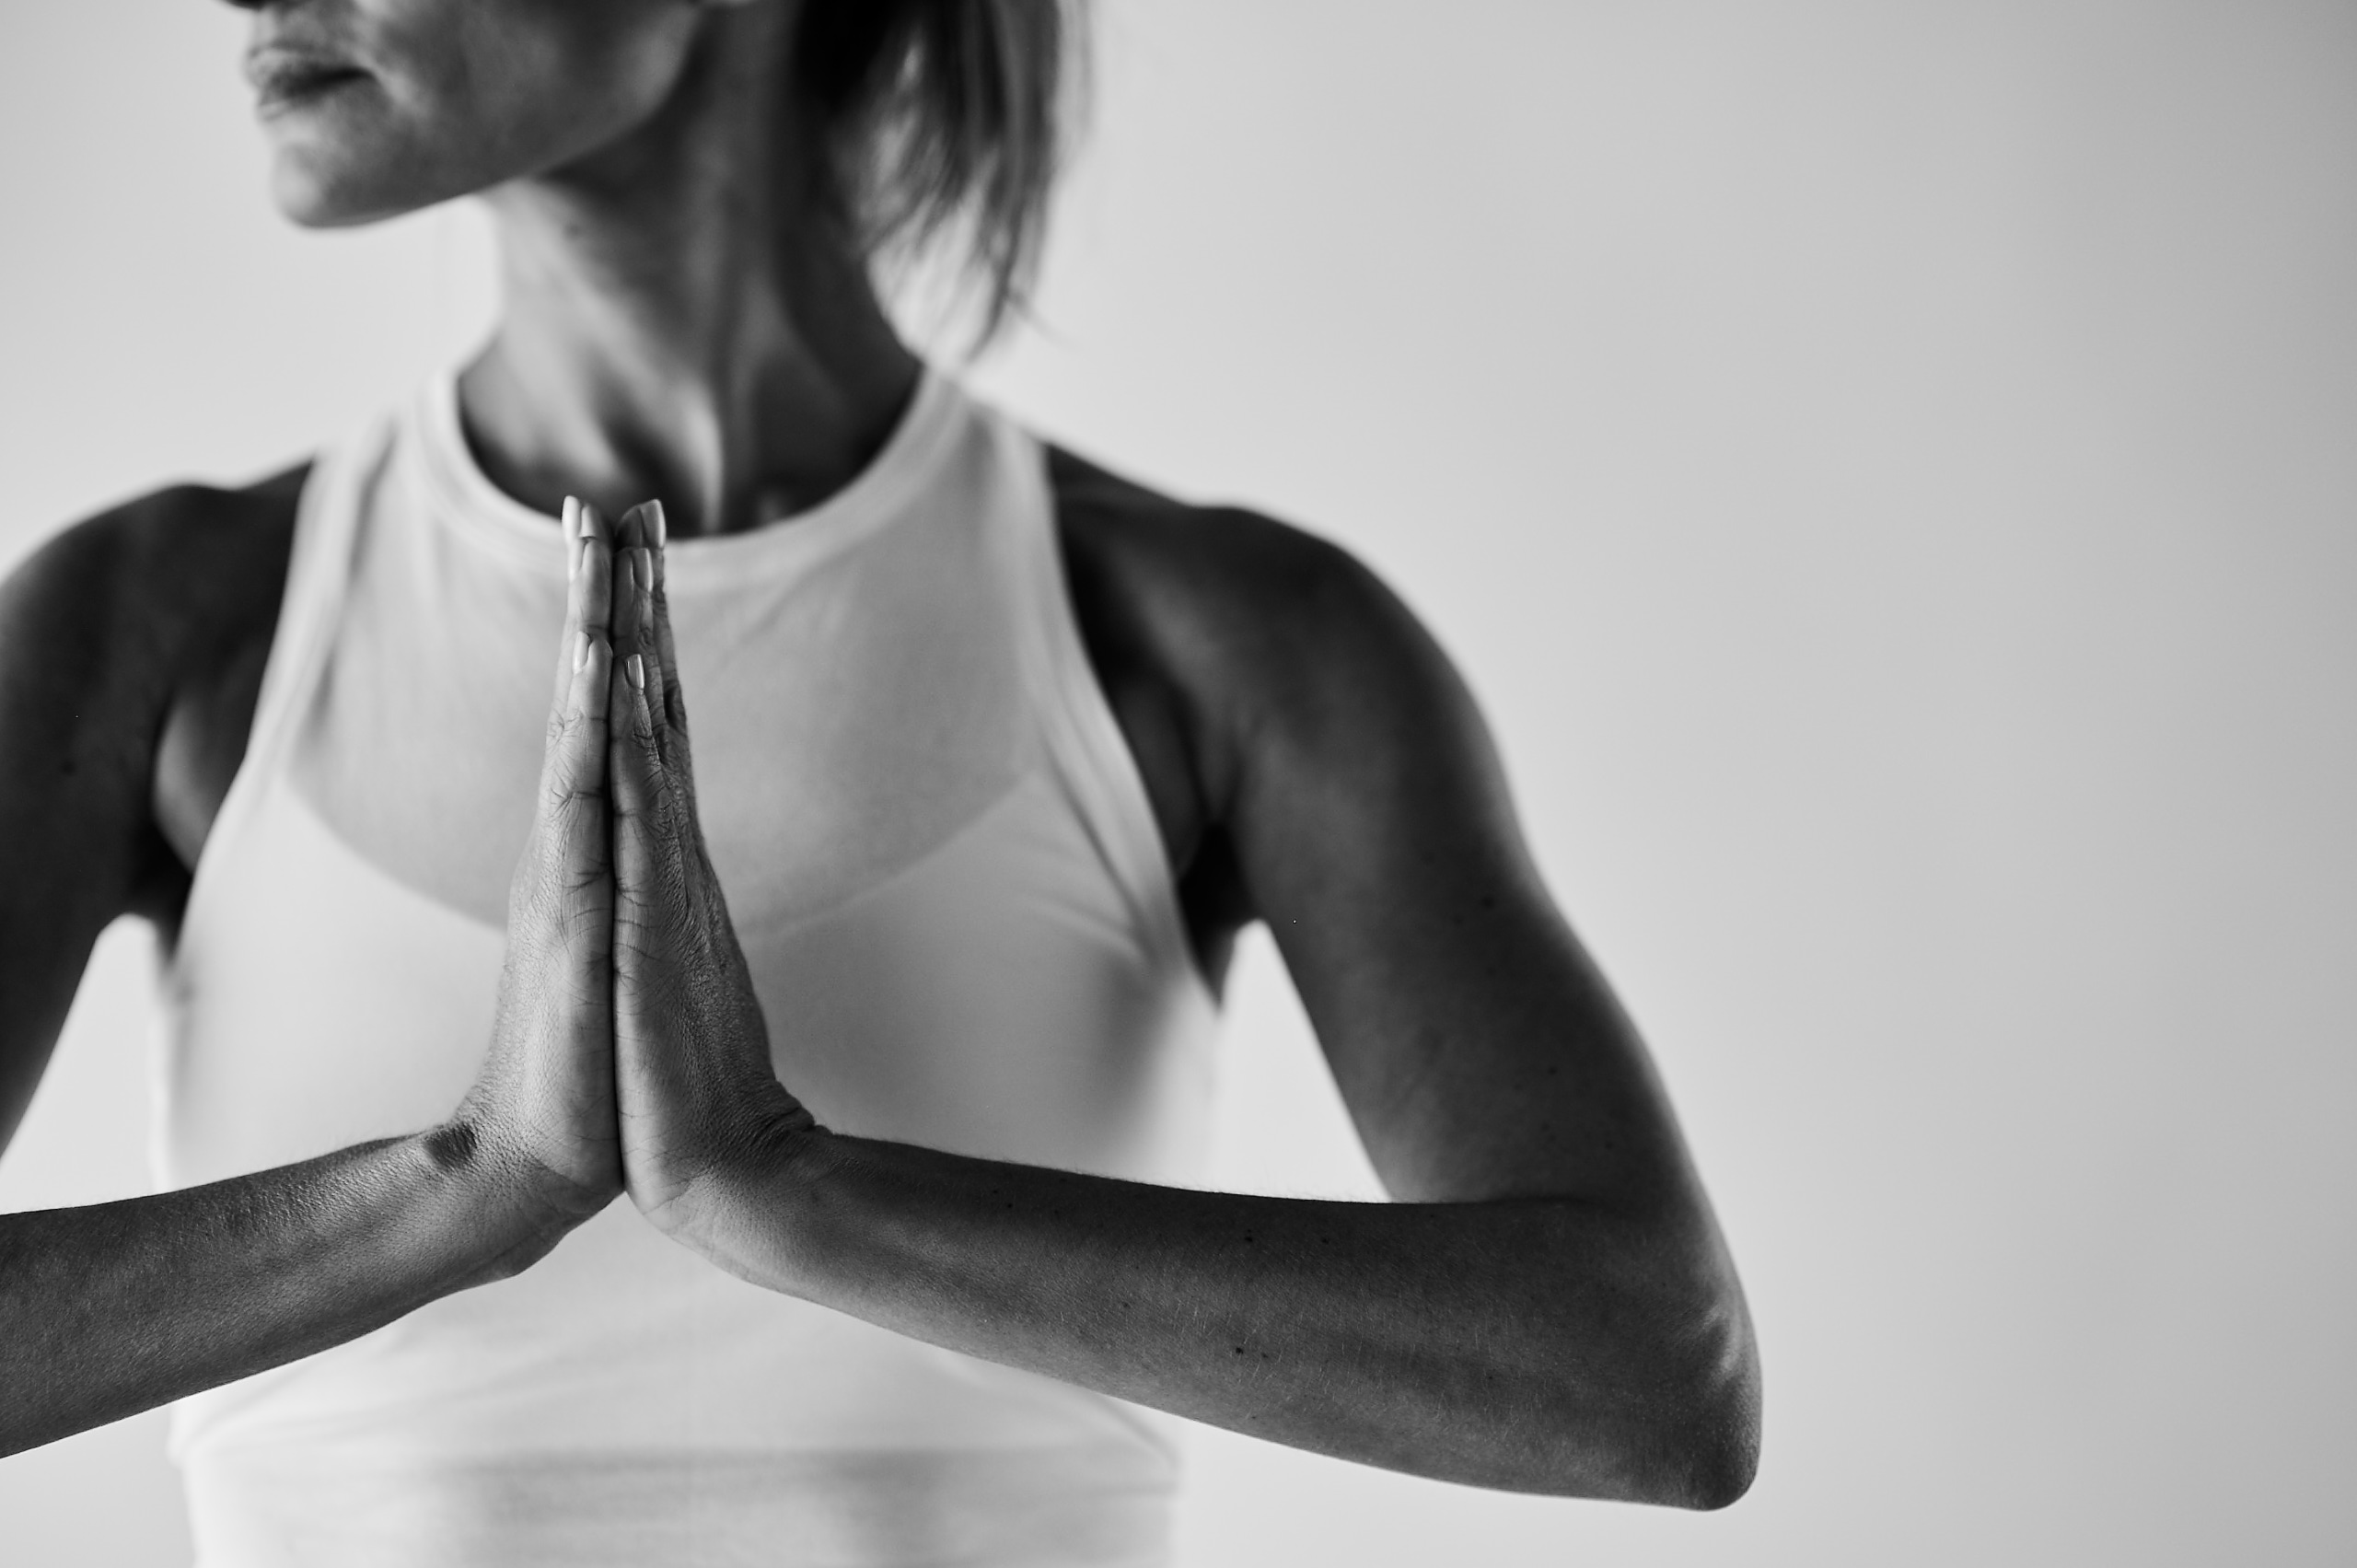 Barre client hands in prayer position